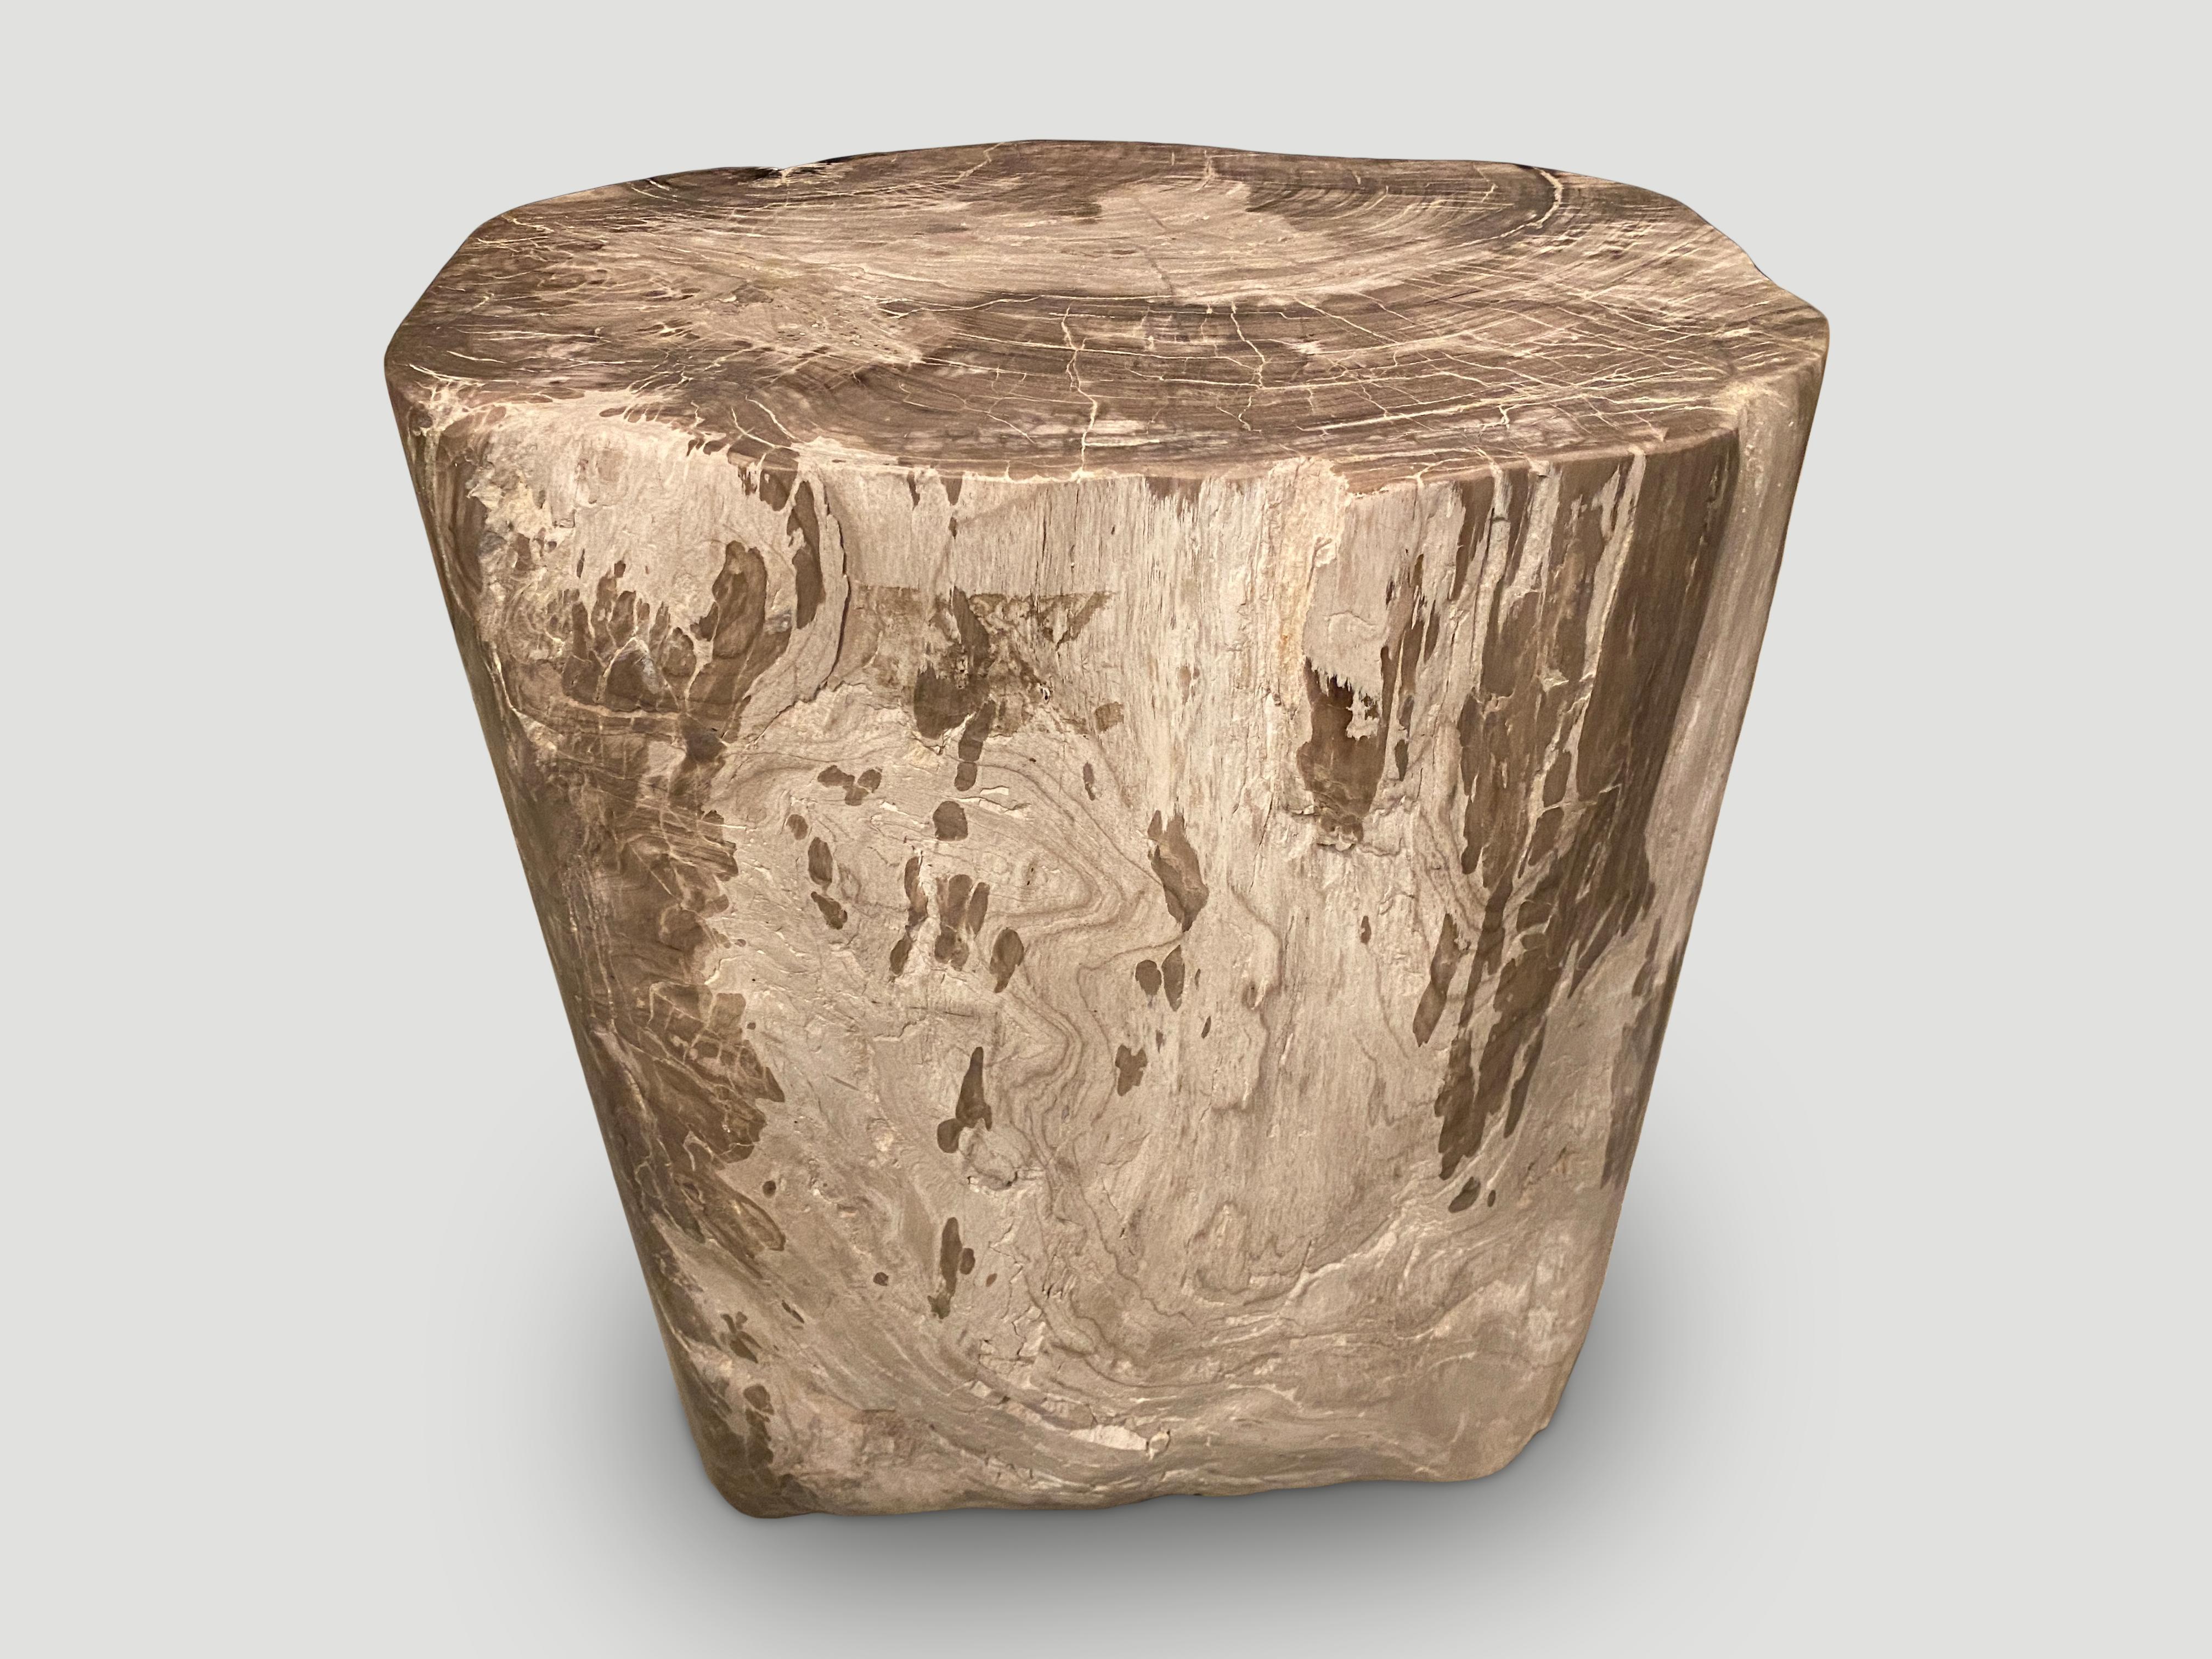 Impressive beautiful contrasting tones and textures on this ancient petrified wood side table. It’s fascinating how Mother Nature produces these exquisite 40 million year old petrified teak logs with such contrasting colors and natural patterns